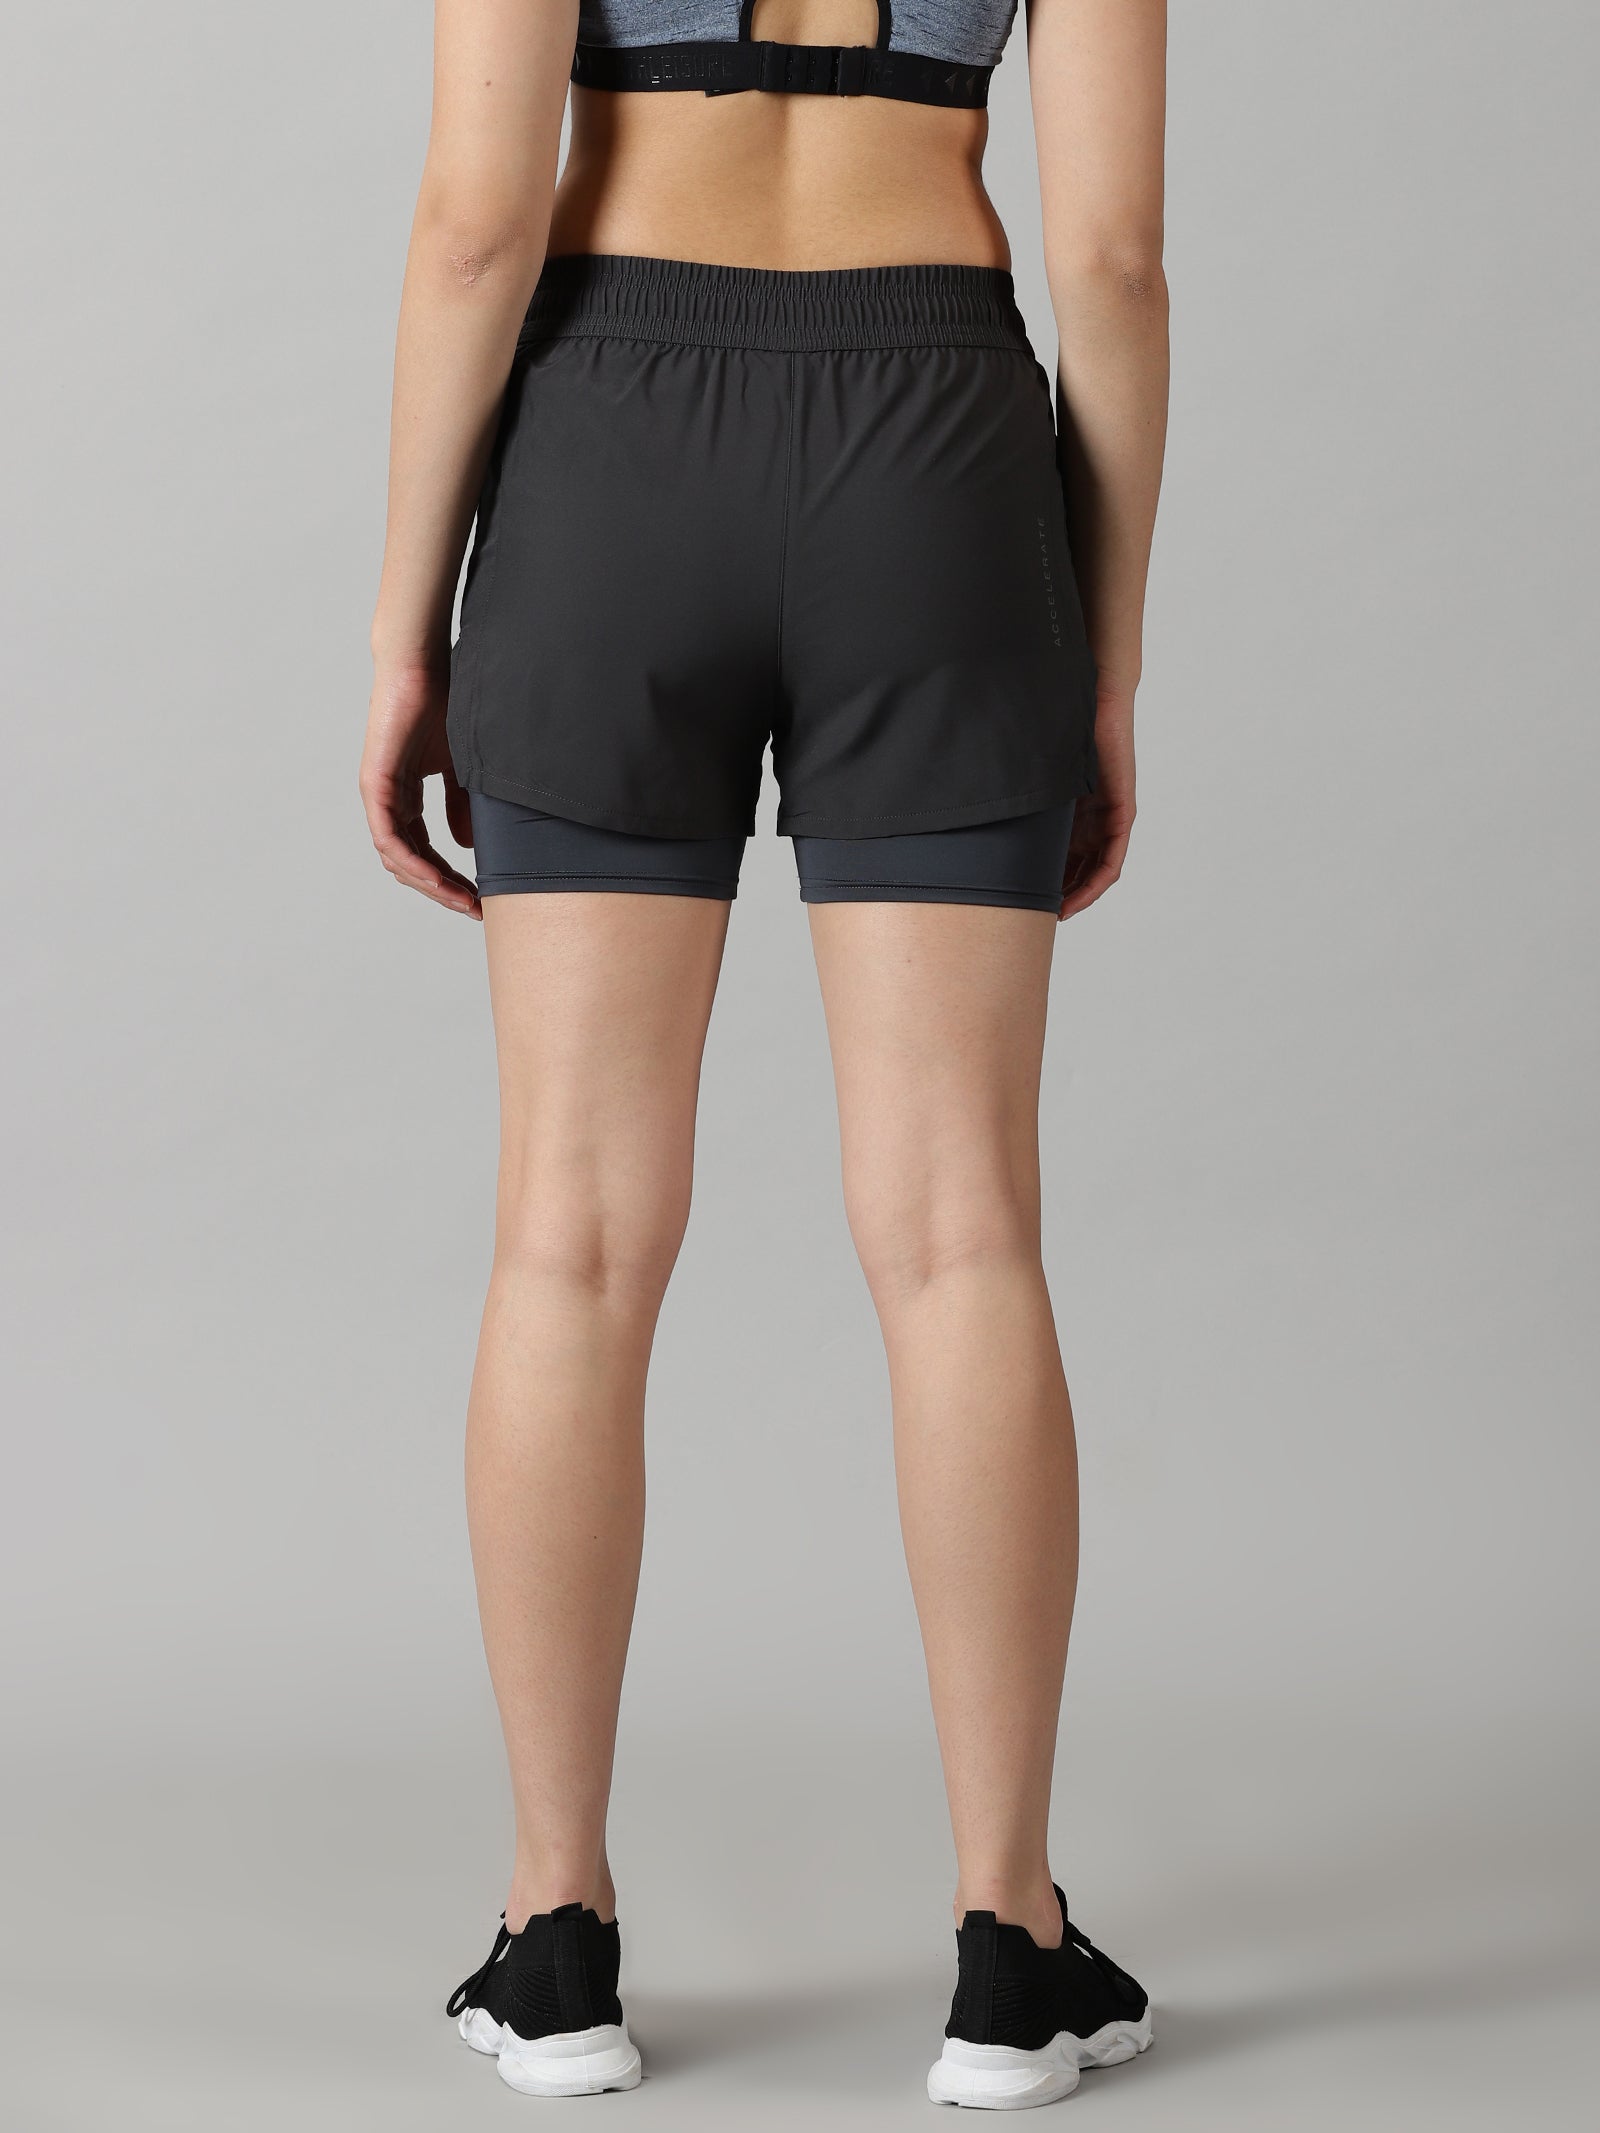 Run Shorts Combo: Graphite and Red